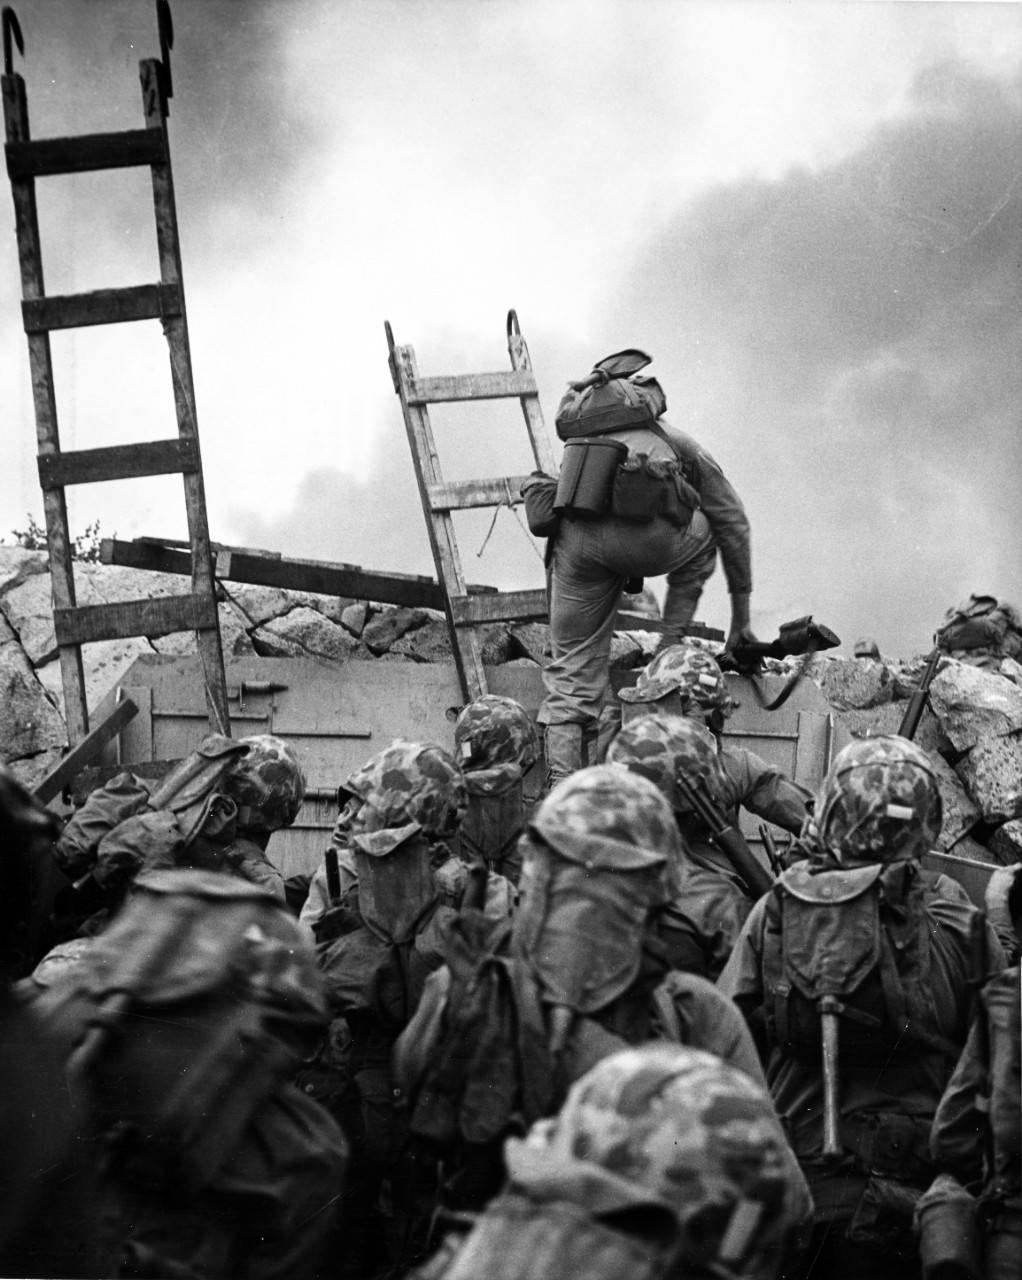 First Lieutenant Baldomero Lopez, USMC, leads the 3rd Platoon, Company A, 1st Battalion, 5th Marines over the seawall on the northern side of Red Beach, as the second assault wave lands, 15 September 1950. Wooden scaling ladders are in use to facilitate disembarkation from the LCVP that brought these men to the shore. Lt. Lopez was killed in action within a few minutes, while assaulting a North Korean bunker. U.S. Marine Corps Photograph, from the collections of the Naval History and Heritage Command.